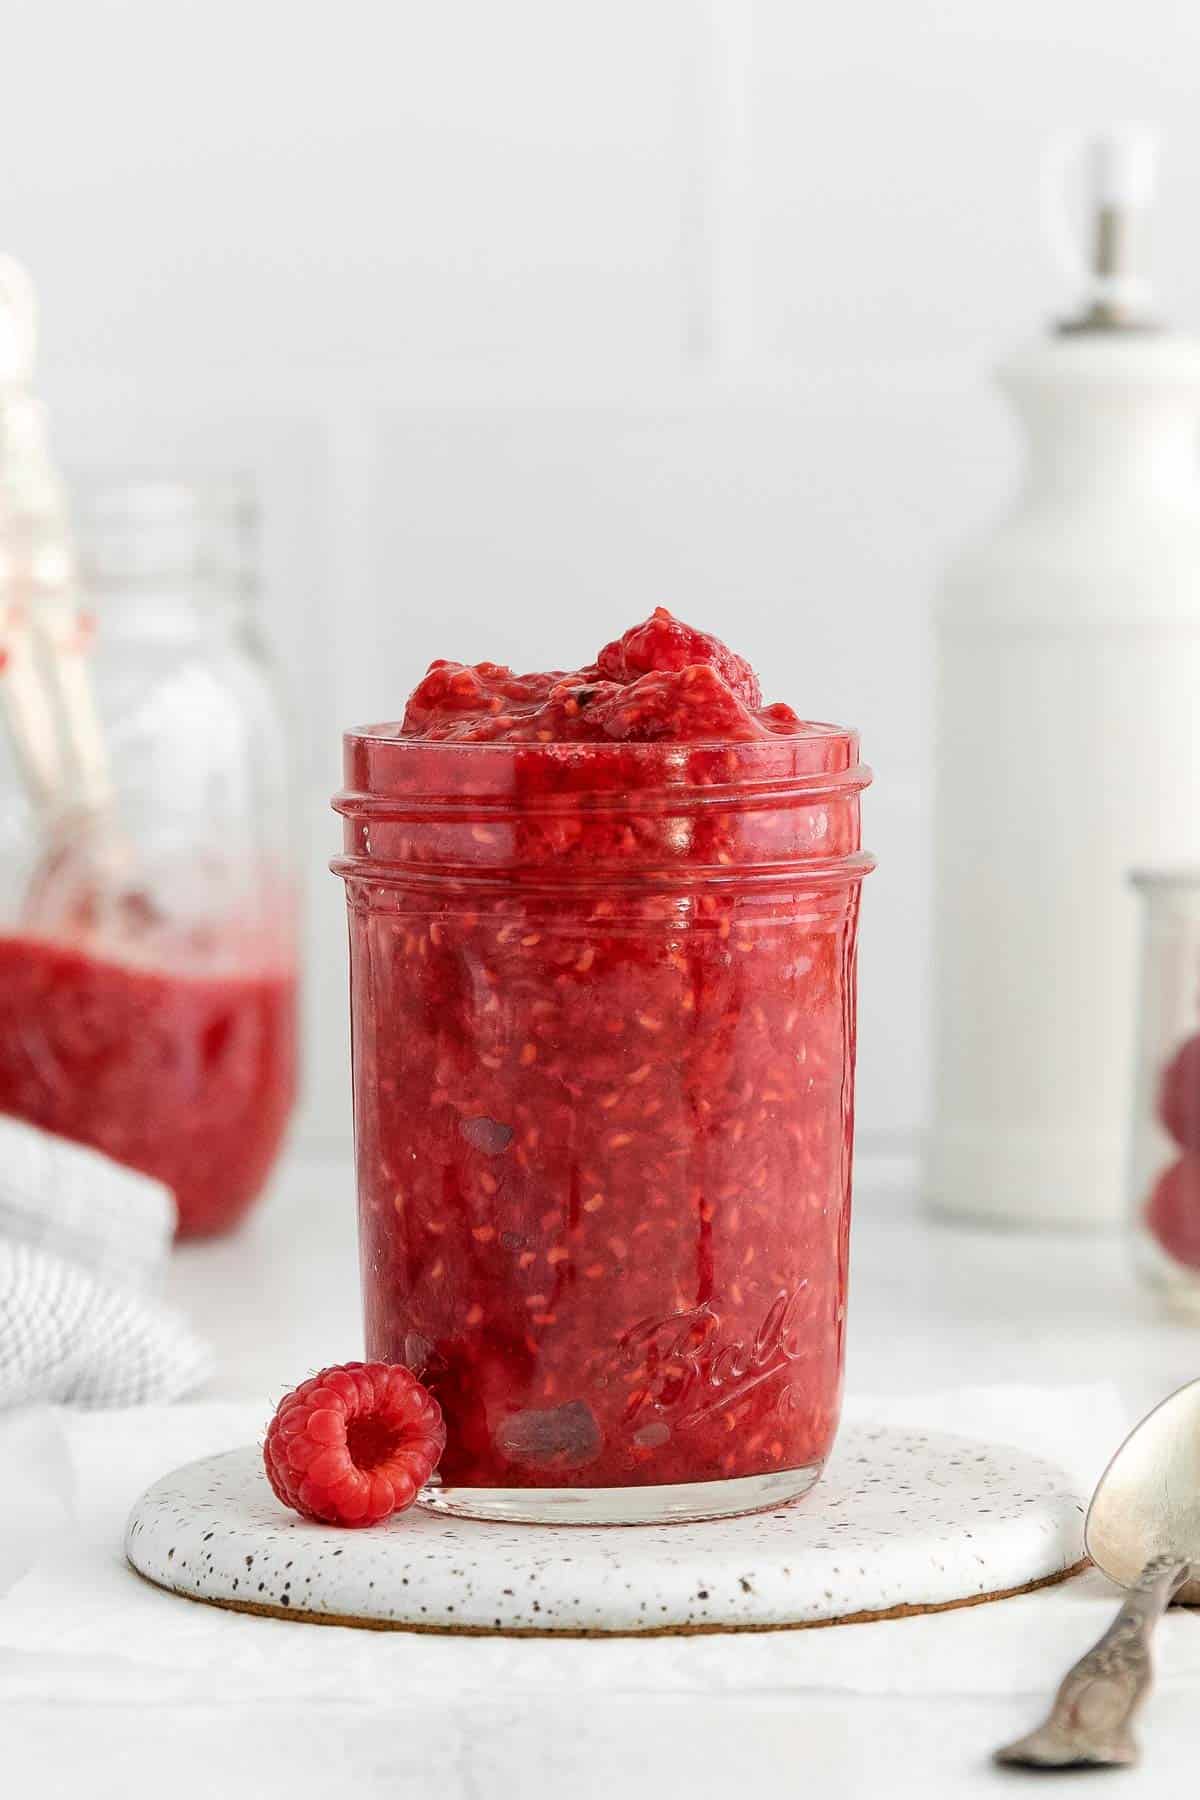 Raspberry compote in a mason jar on a countertop